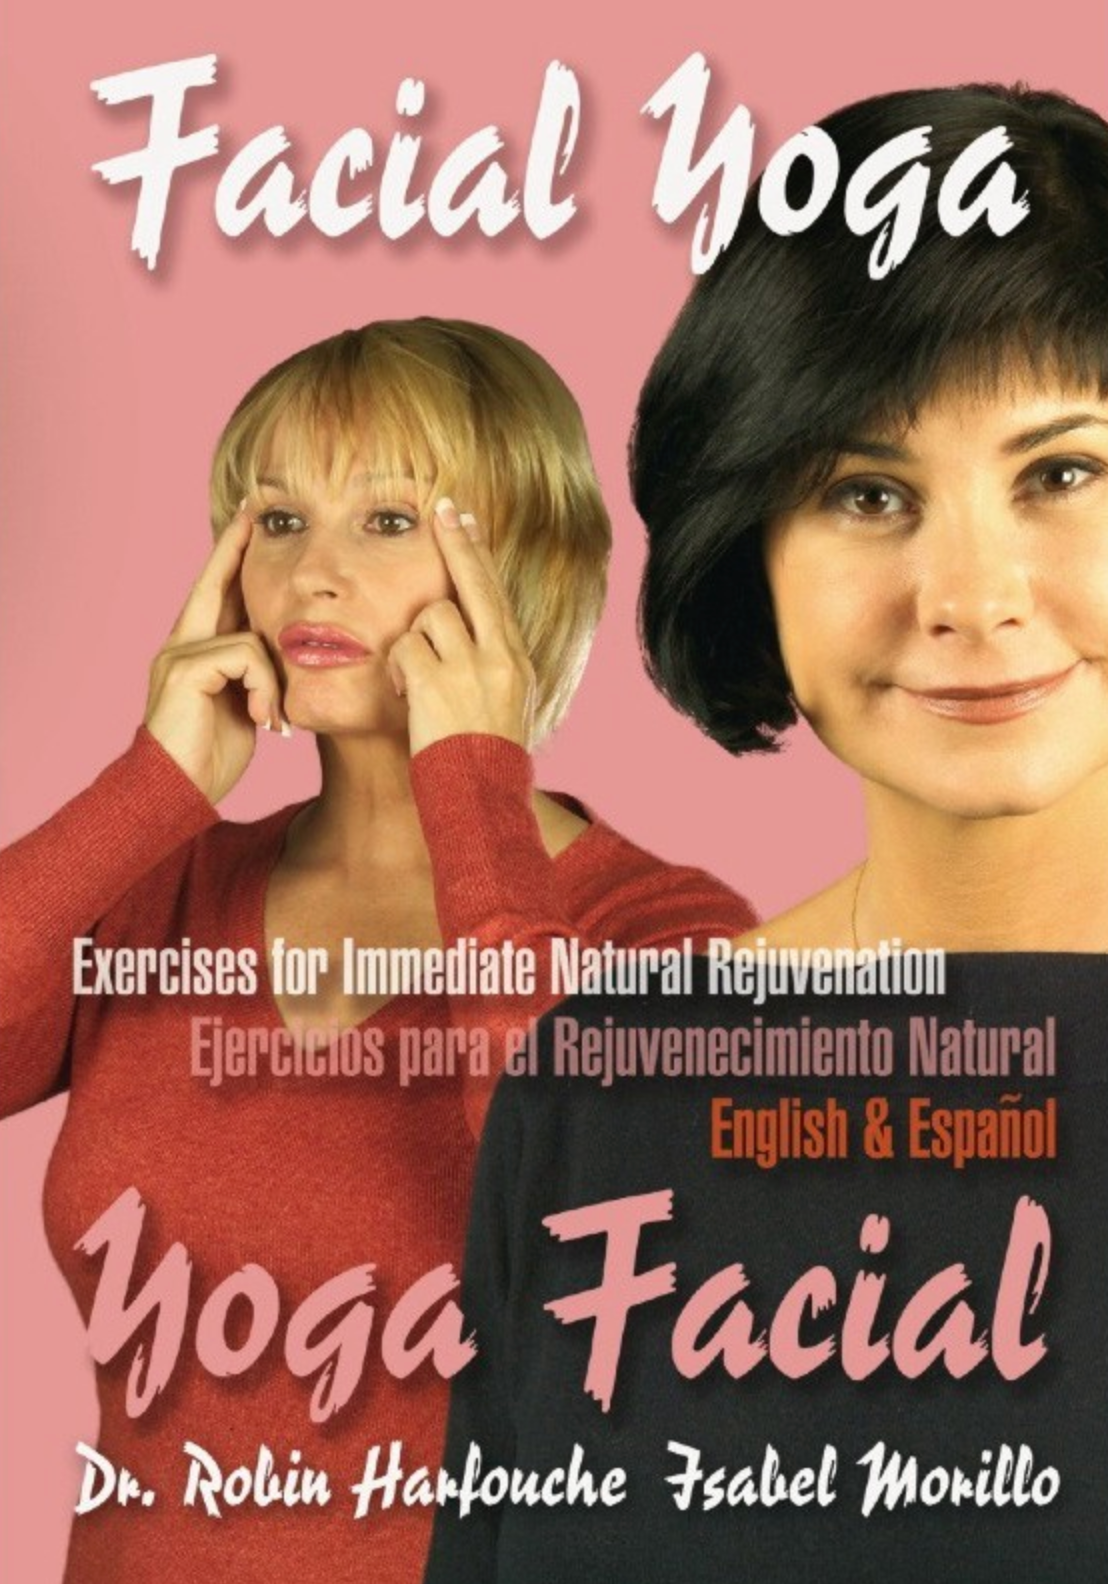 Facial Yoga Natural Rejuvenation Exercises DVD with Robin Harfouche - Budovideos Inc